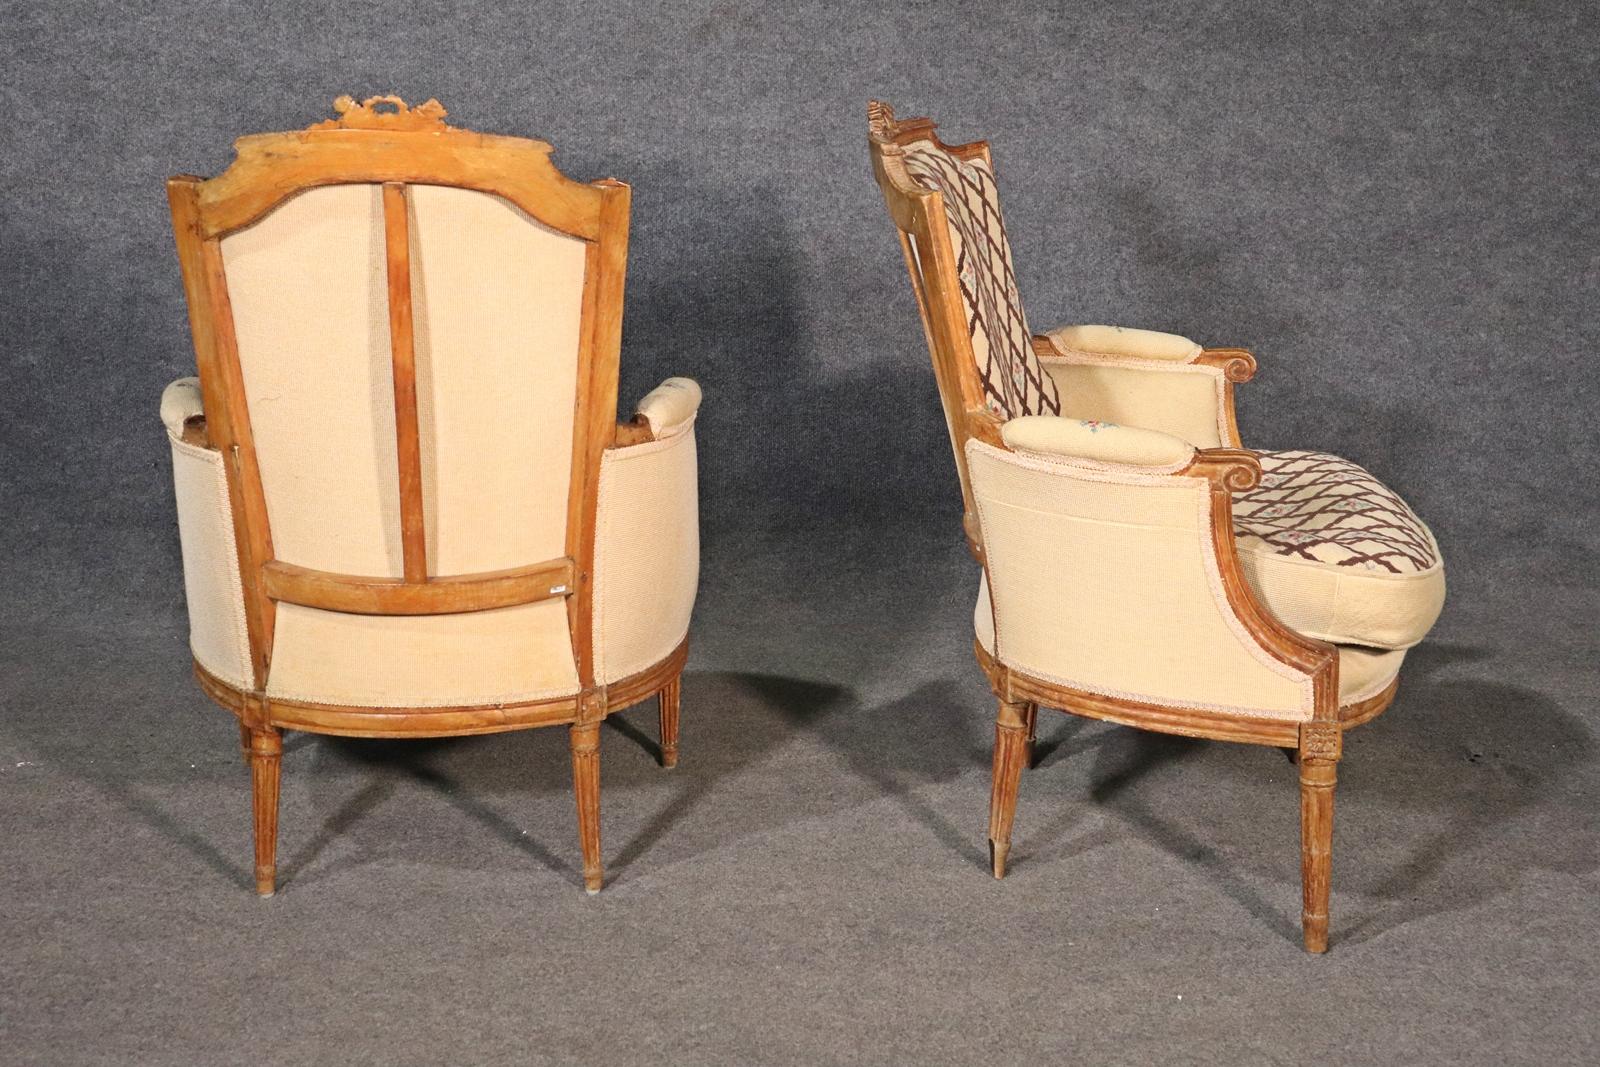 Companion Pair of Nearly Identical French Louis XVI Armchairs, Circa 1900 For Sale 10